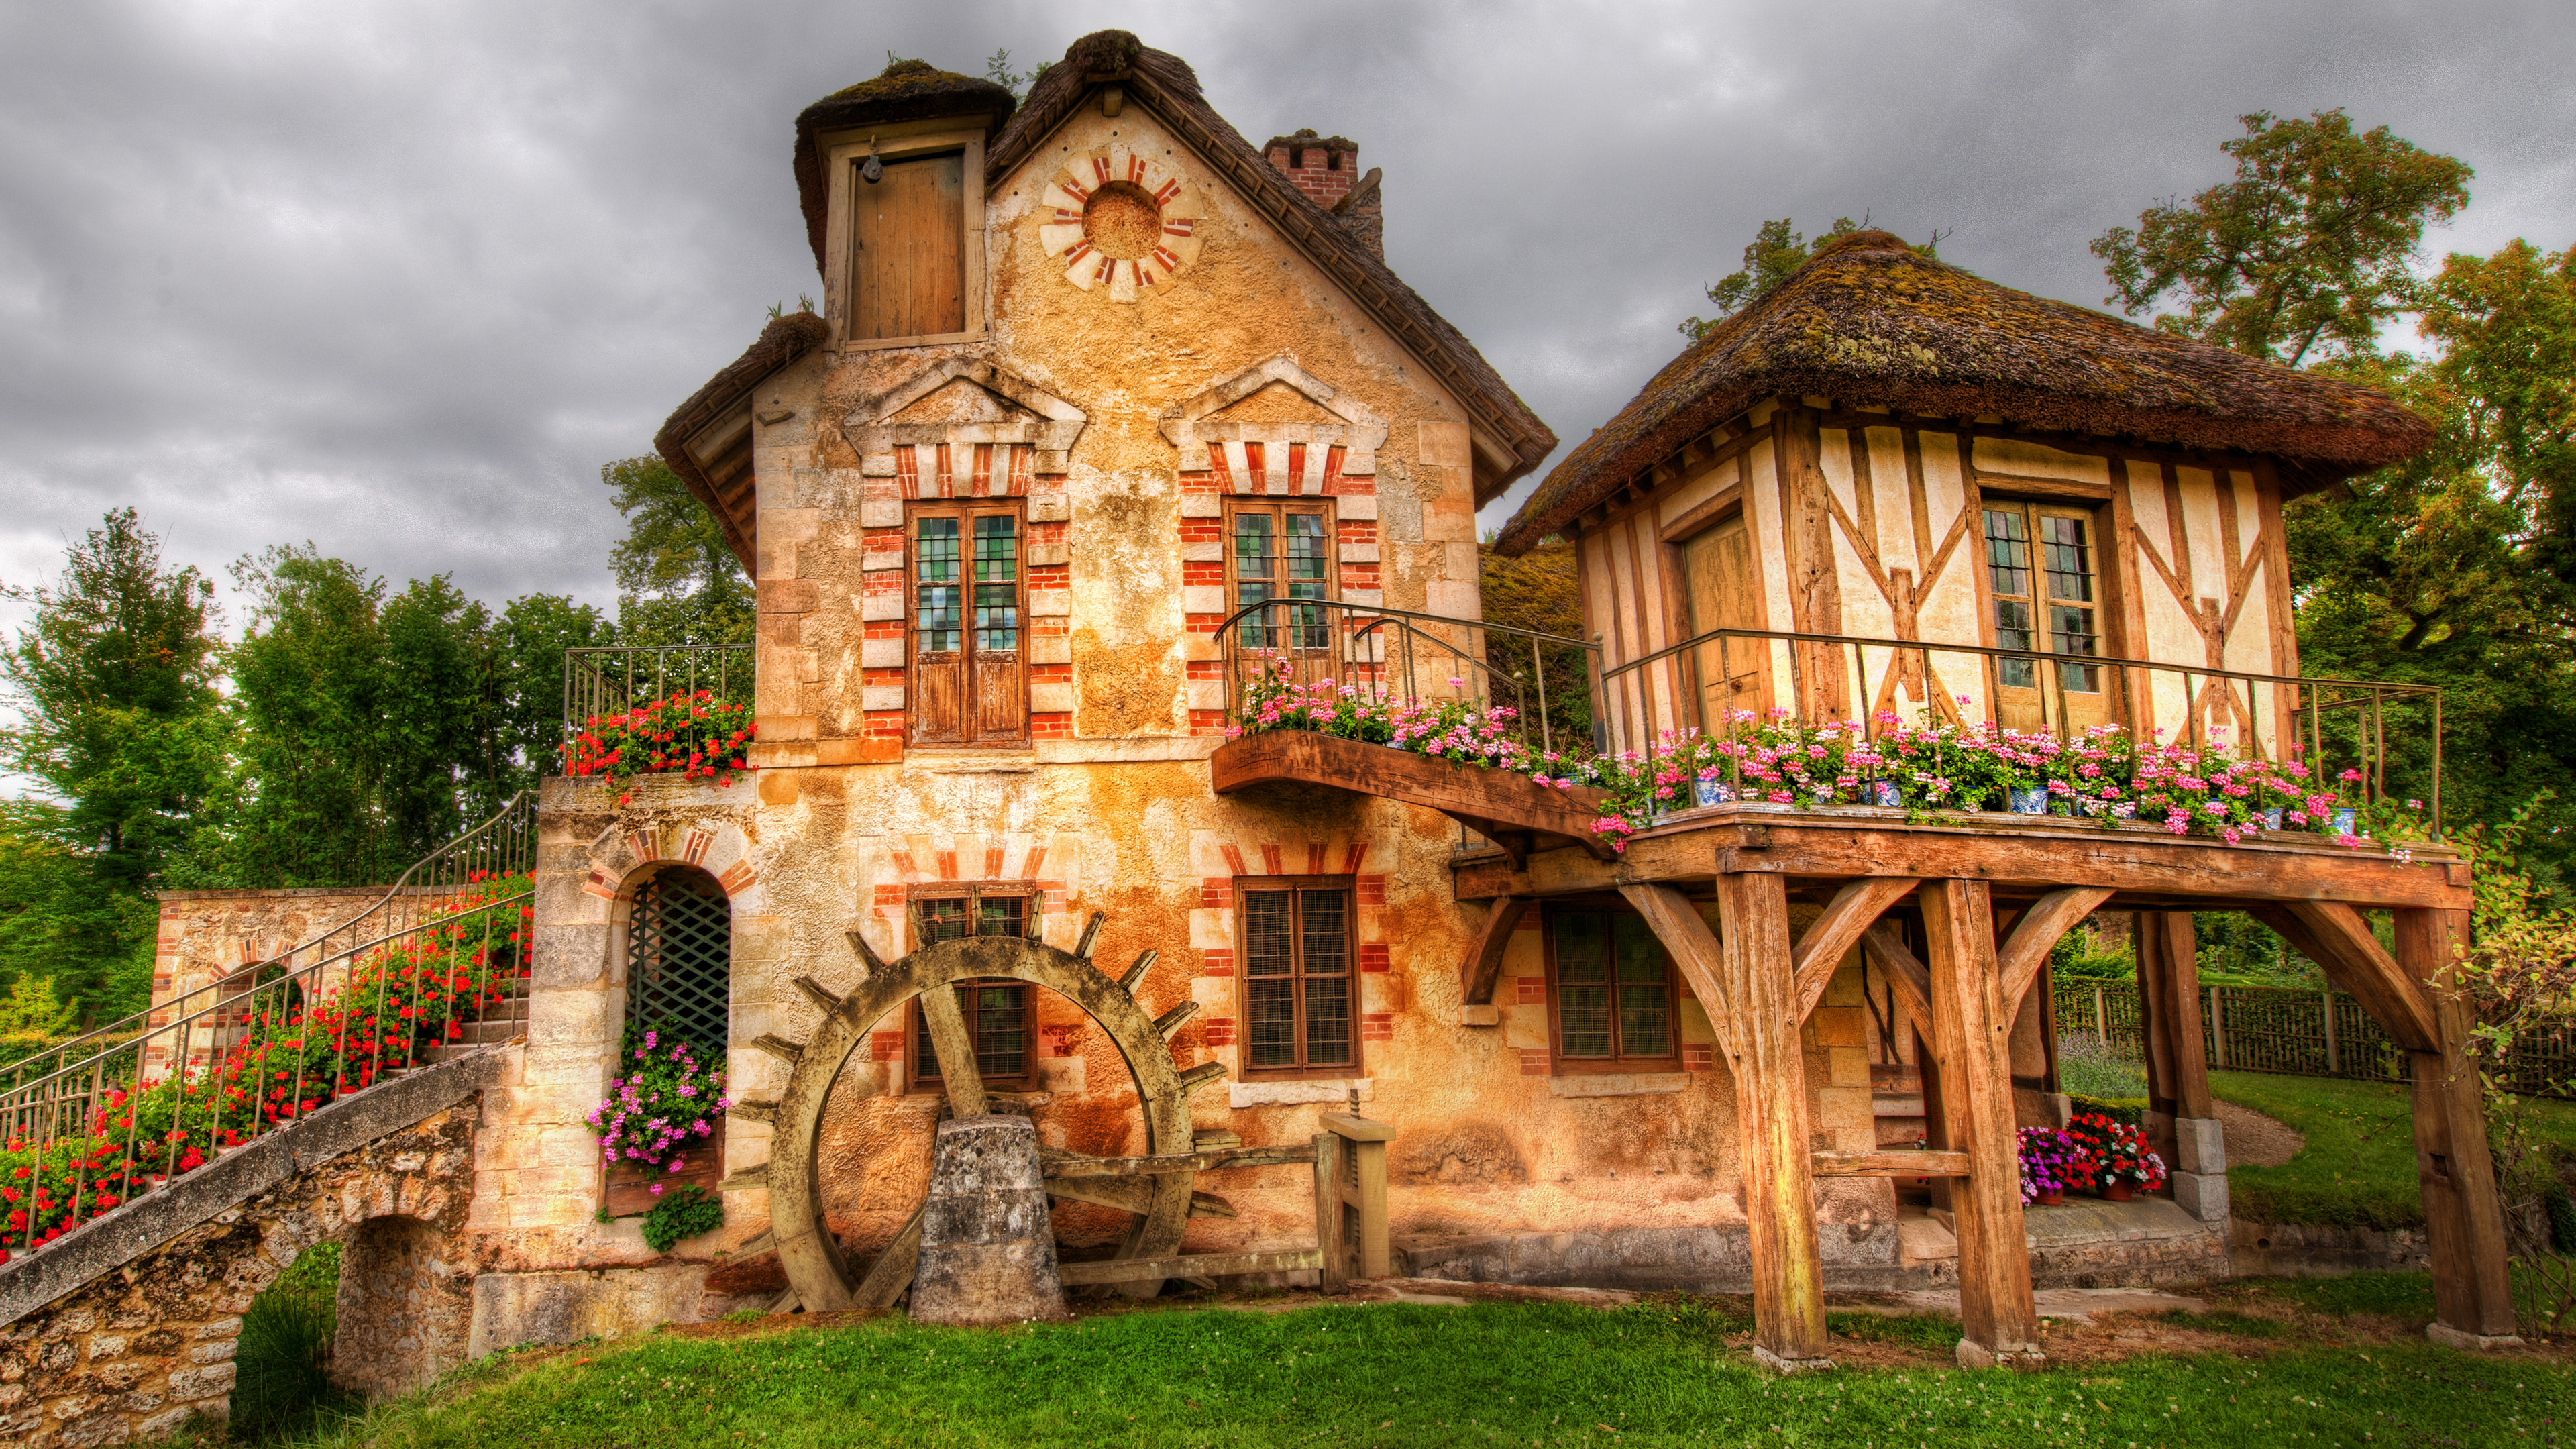 General 3840x2160 Trey Ratcliff photography 4K France building flowers house trees